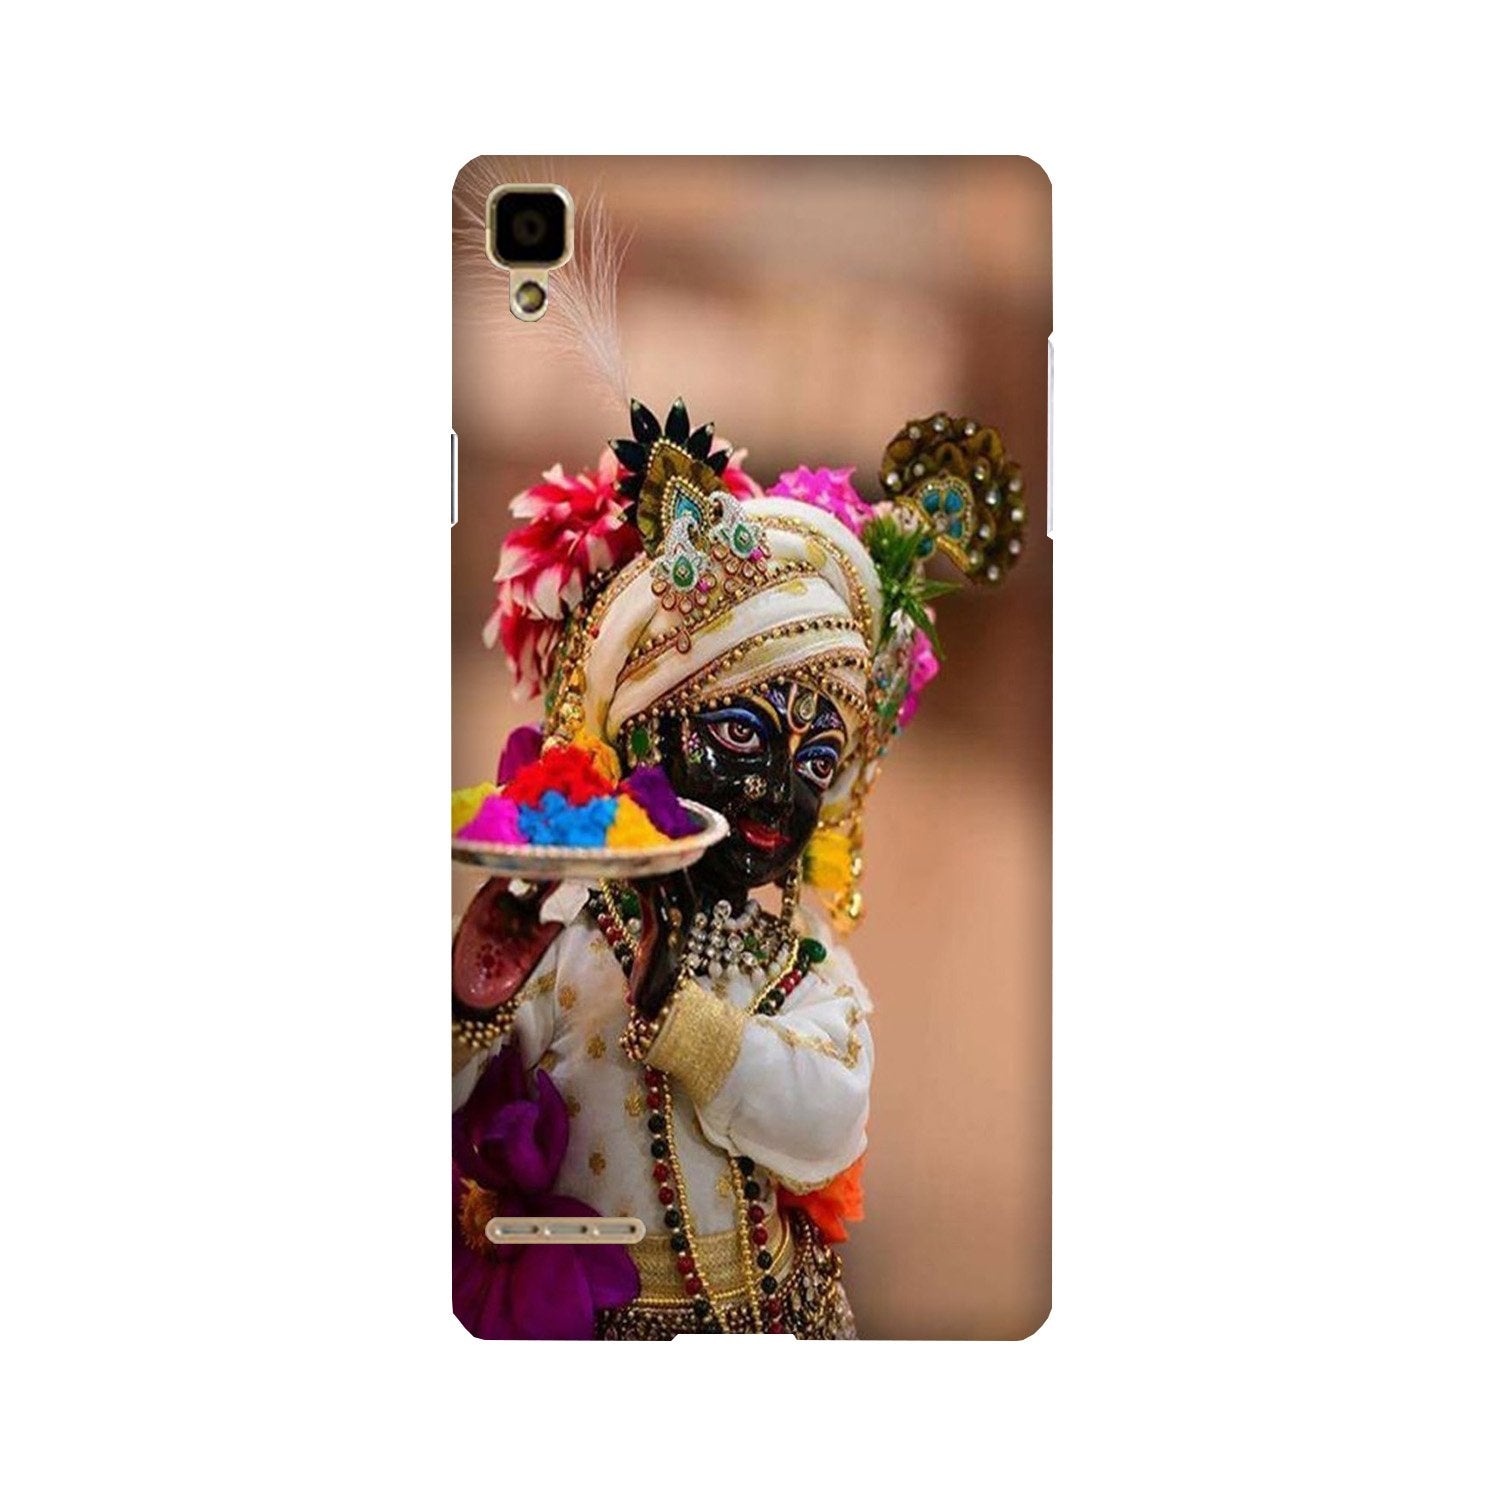 Lord Krishna2 Case for Oppo F1